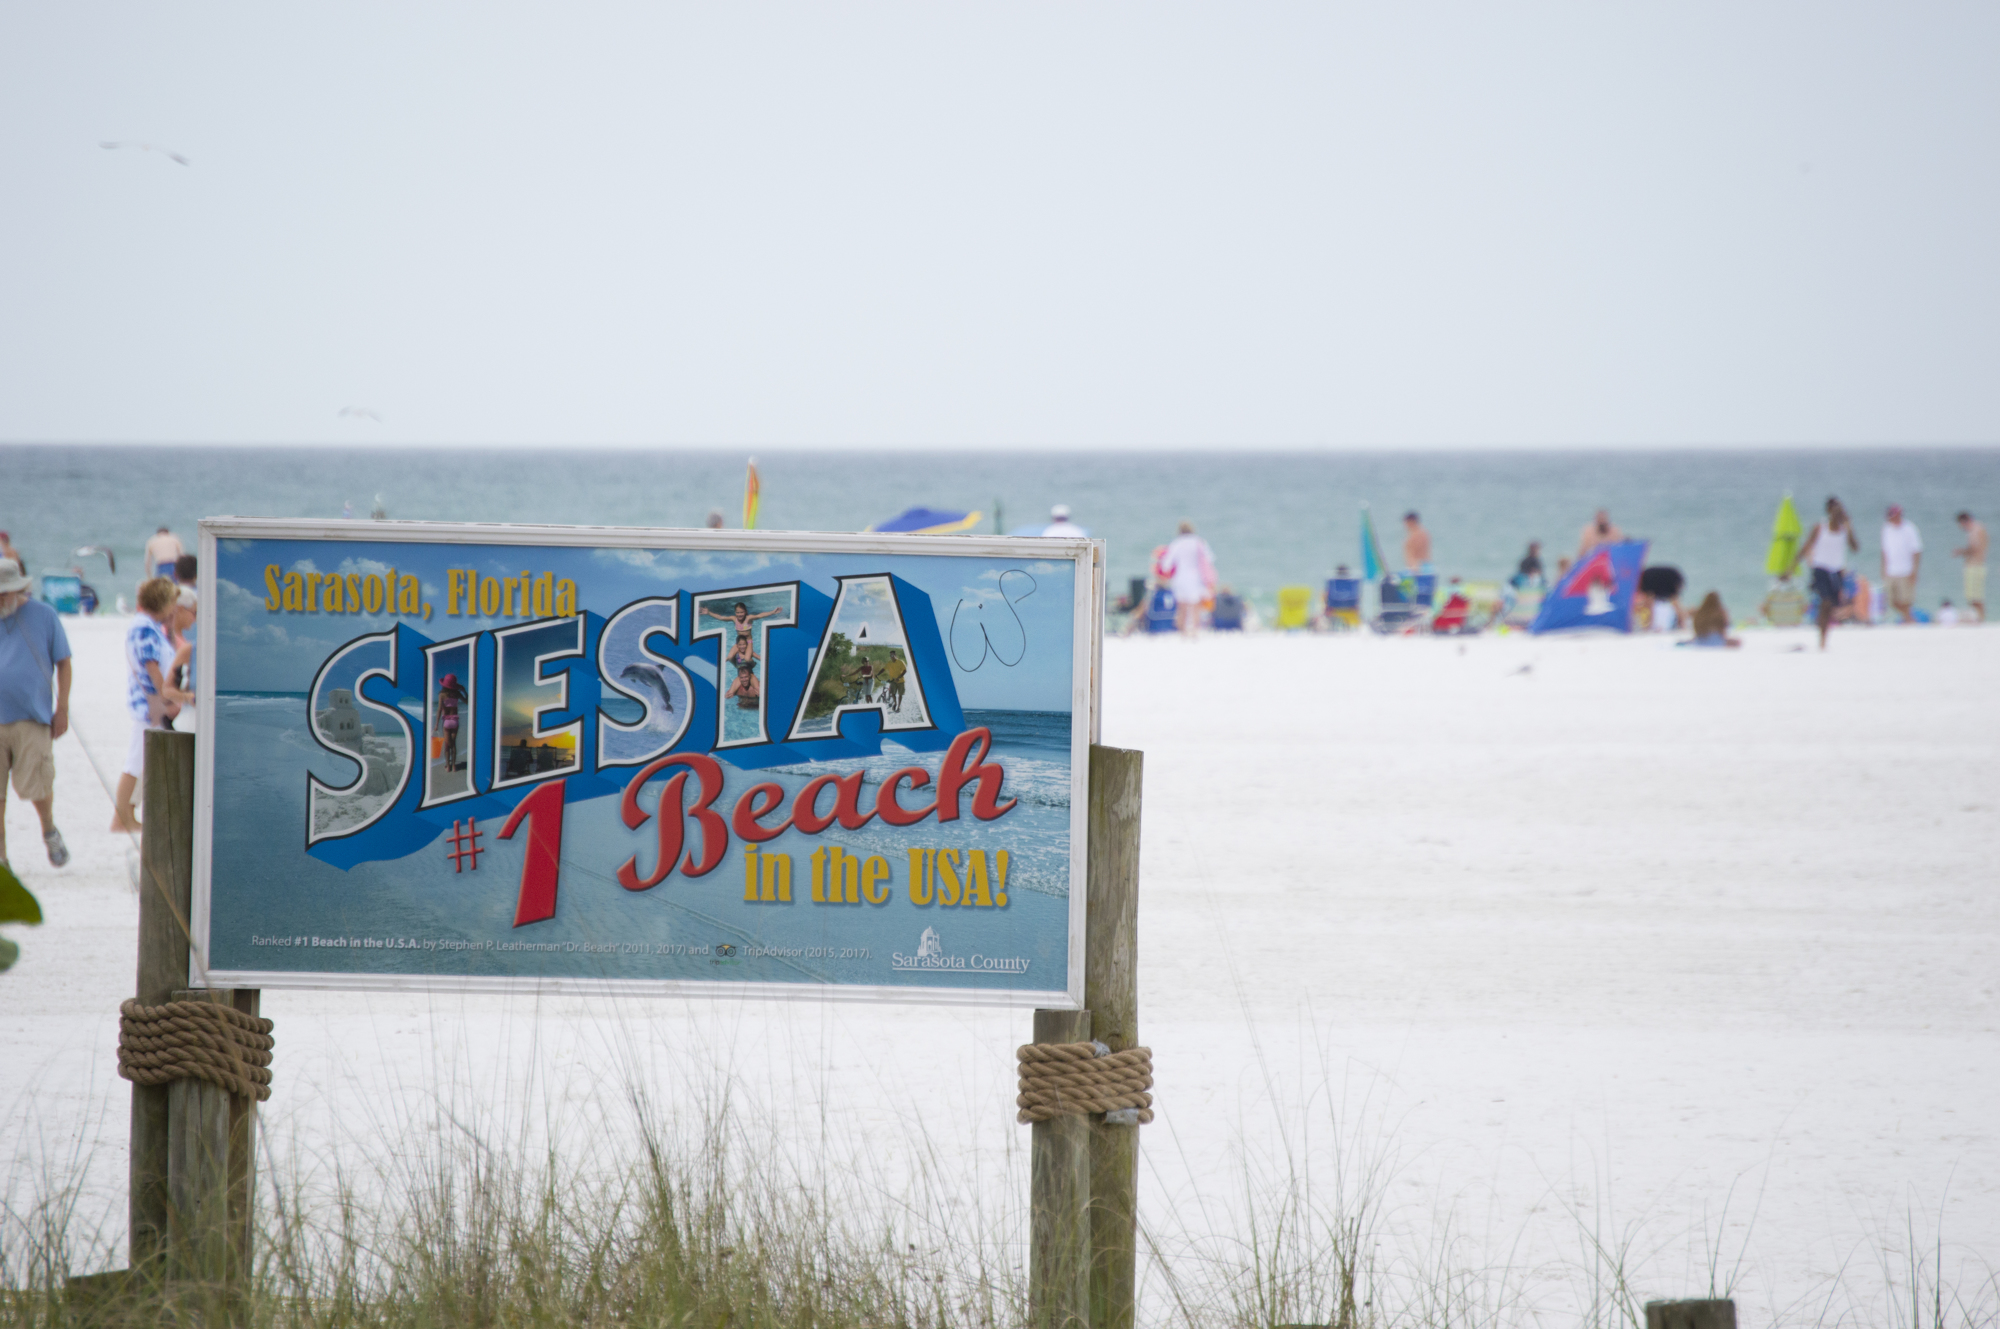 Siesta Key's beach fell to No. 2 in TripAdvisor's Traveler's Choice Awards in 2018 after capturing the top spot in 2017.